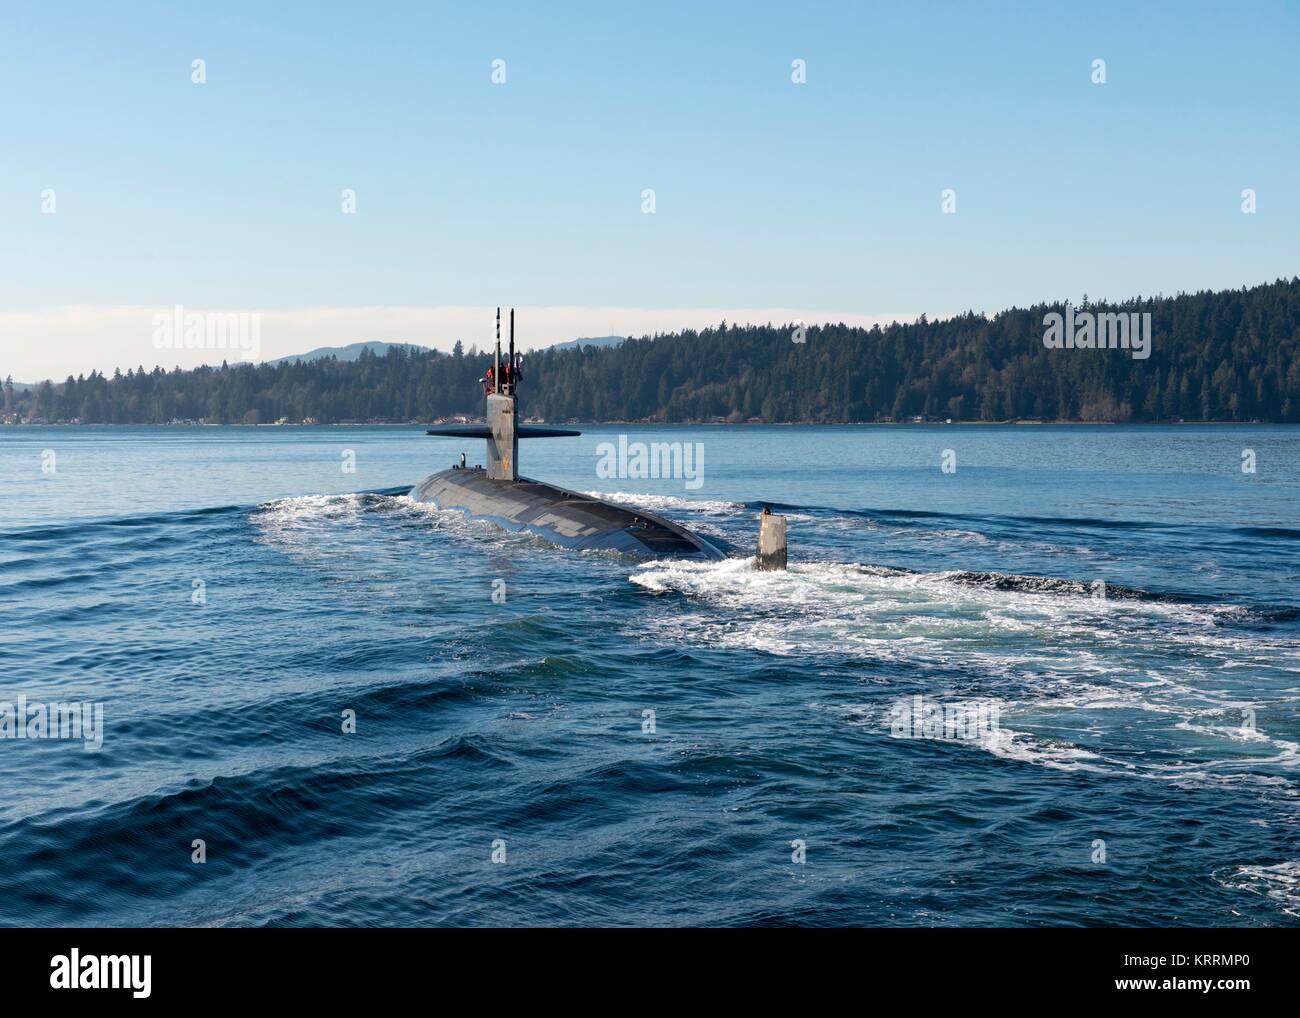 The U.S. Navy Los Angeles-class fast-attack submarine USS Jacksonville transits the Puget Sound on its way to the Naval Base Kitsap-Bremerton December 11, 2017 in Bremerton, Washington. Stock Photo